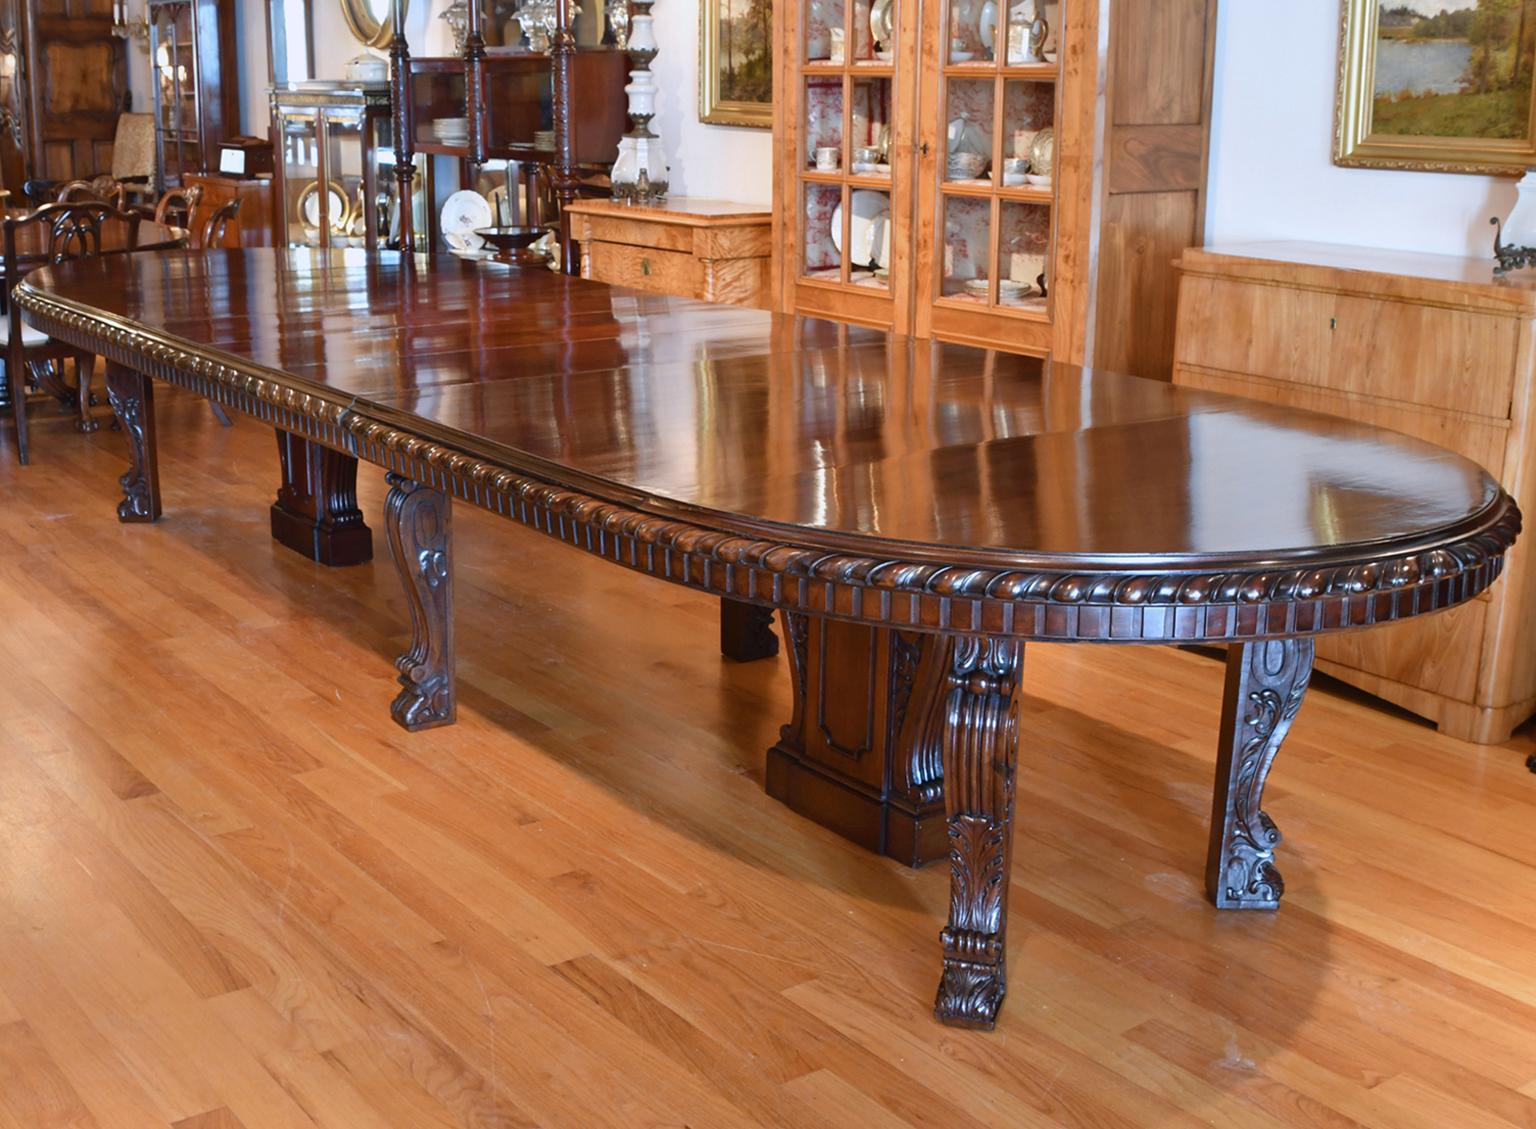 Belle Époque New York Gilded Age 12'-20' Long Extension Dining Table in West Indies Mahogany